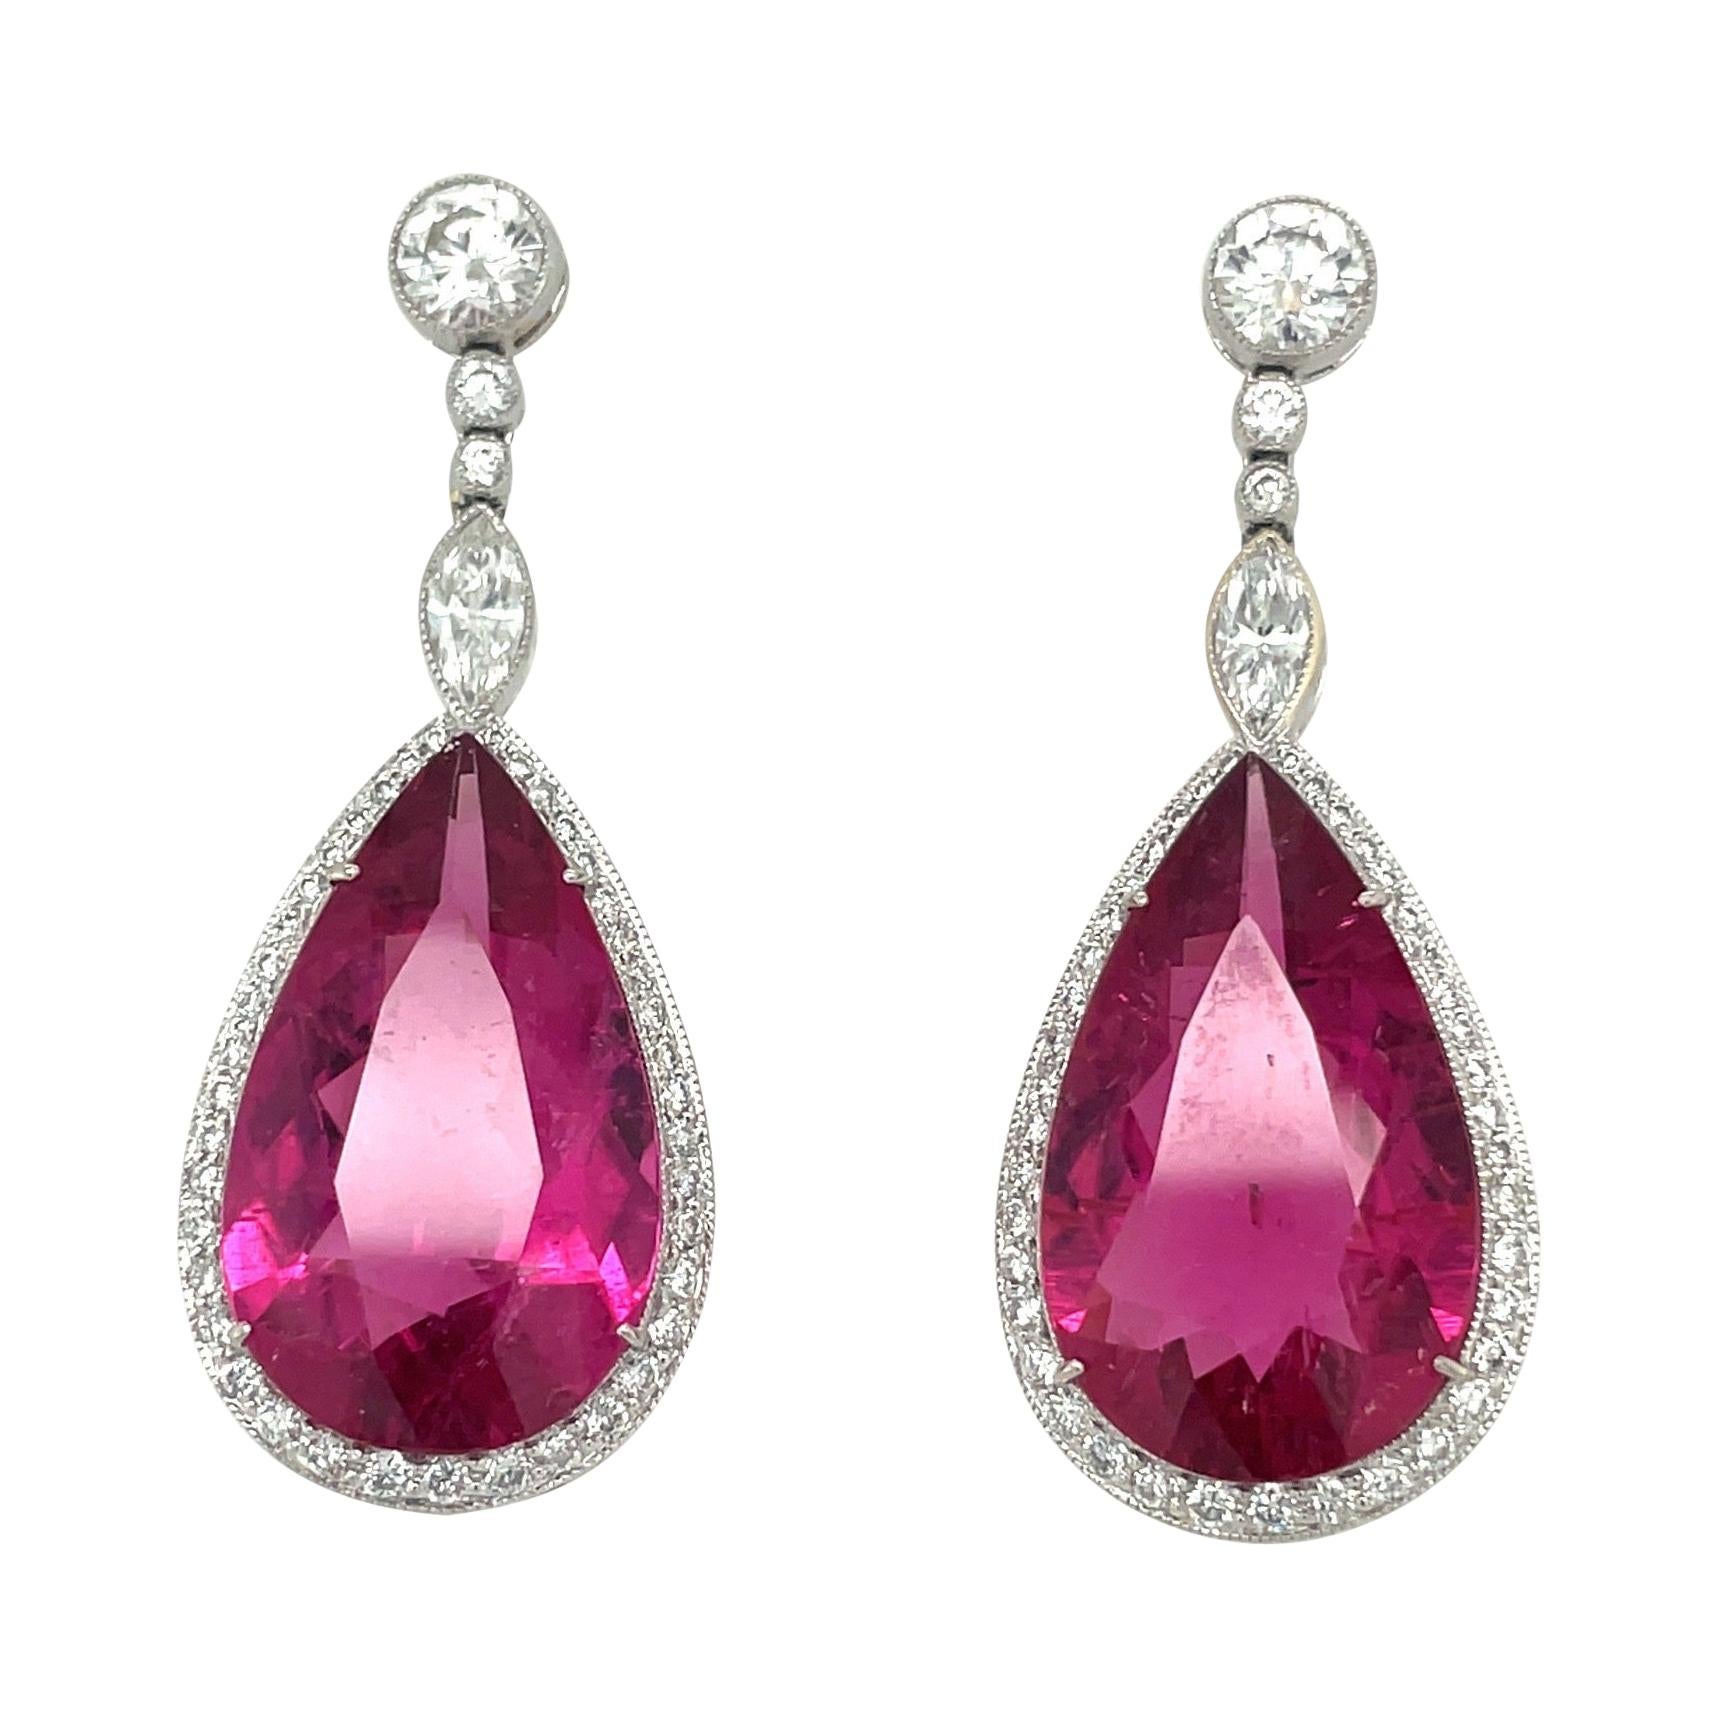 Platinum 22.36ct. Pear Shaped Rubellite Drop Earrings with 1.83ct. Diamonds For Sale